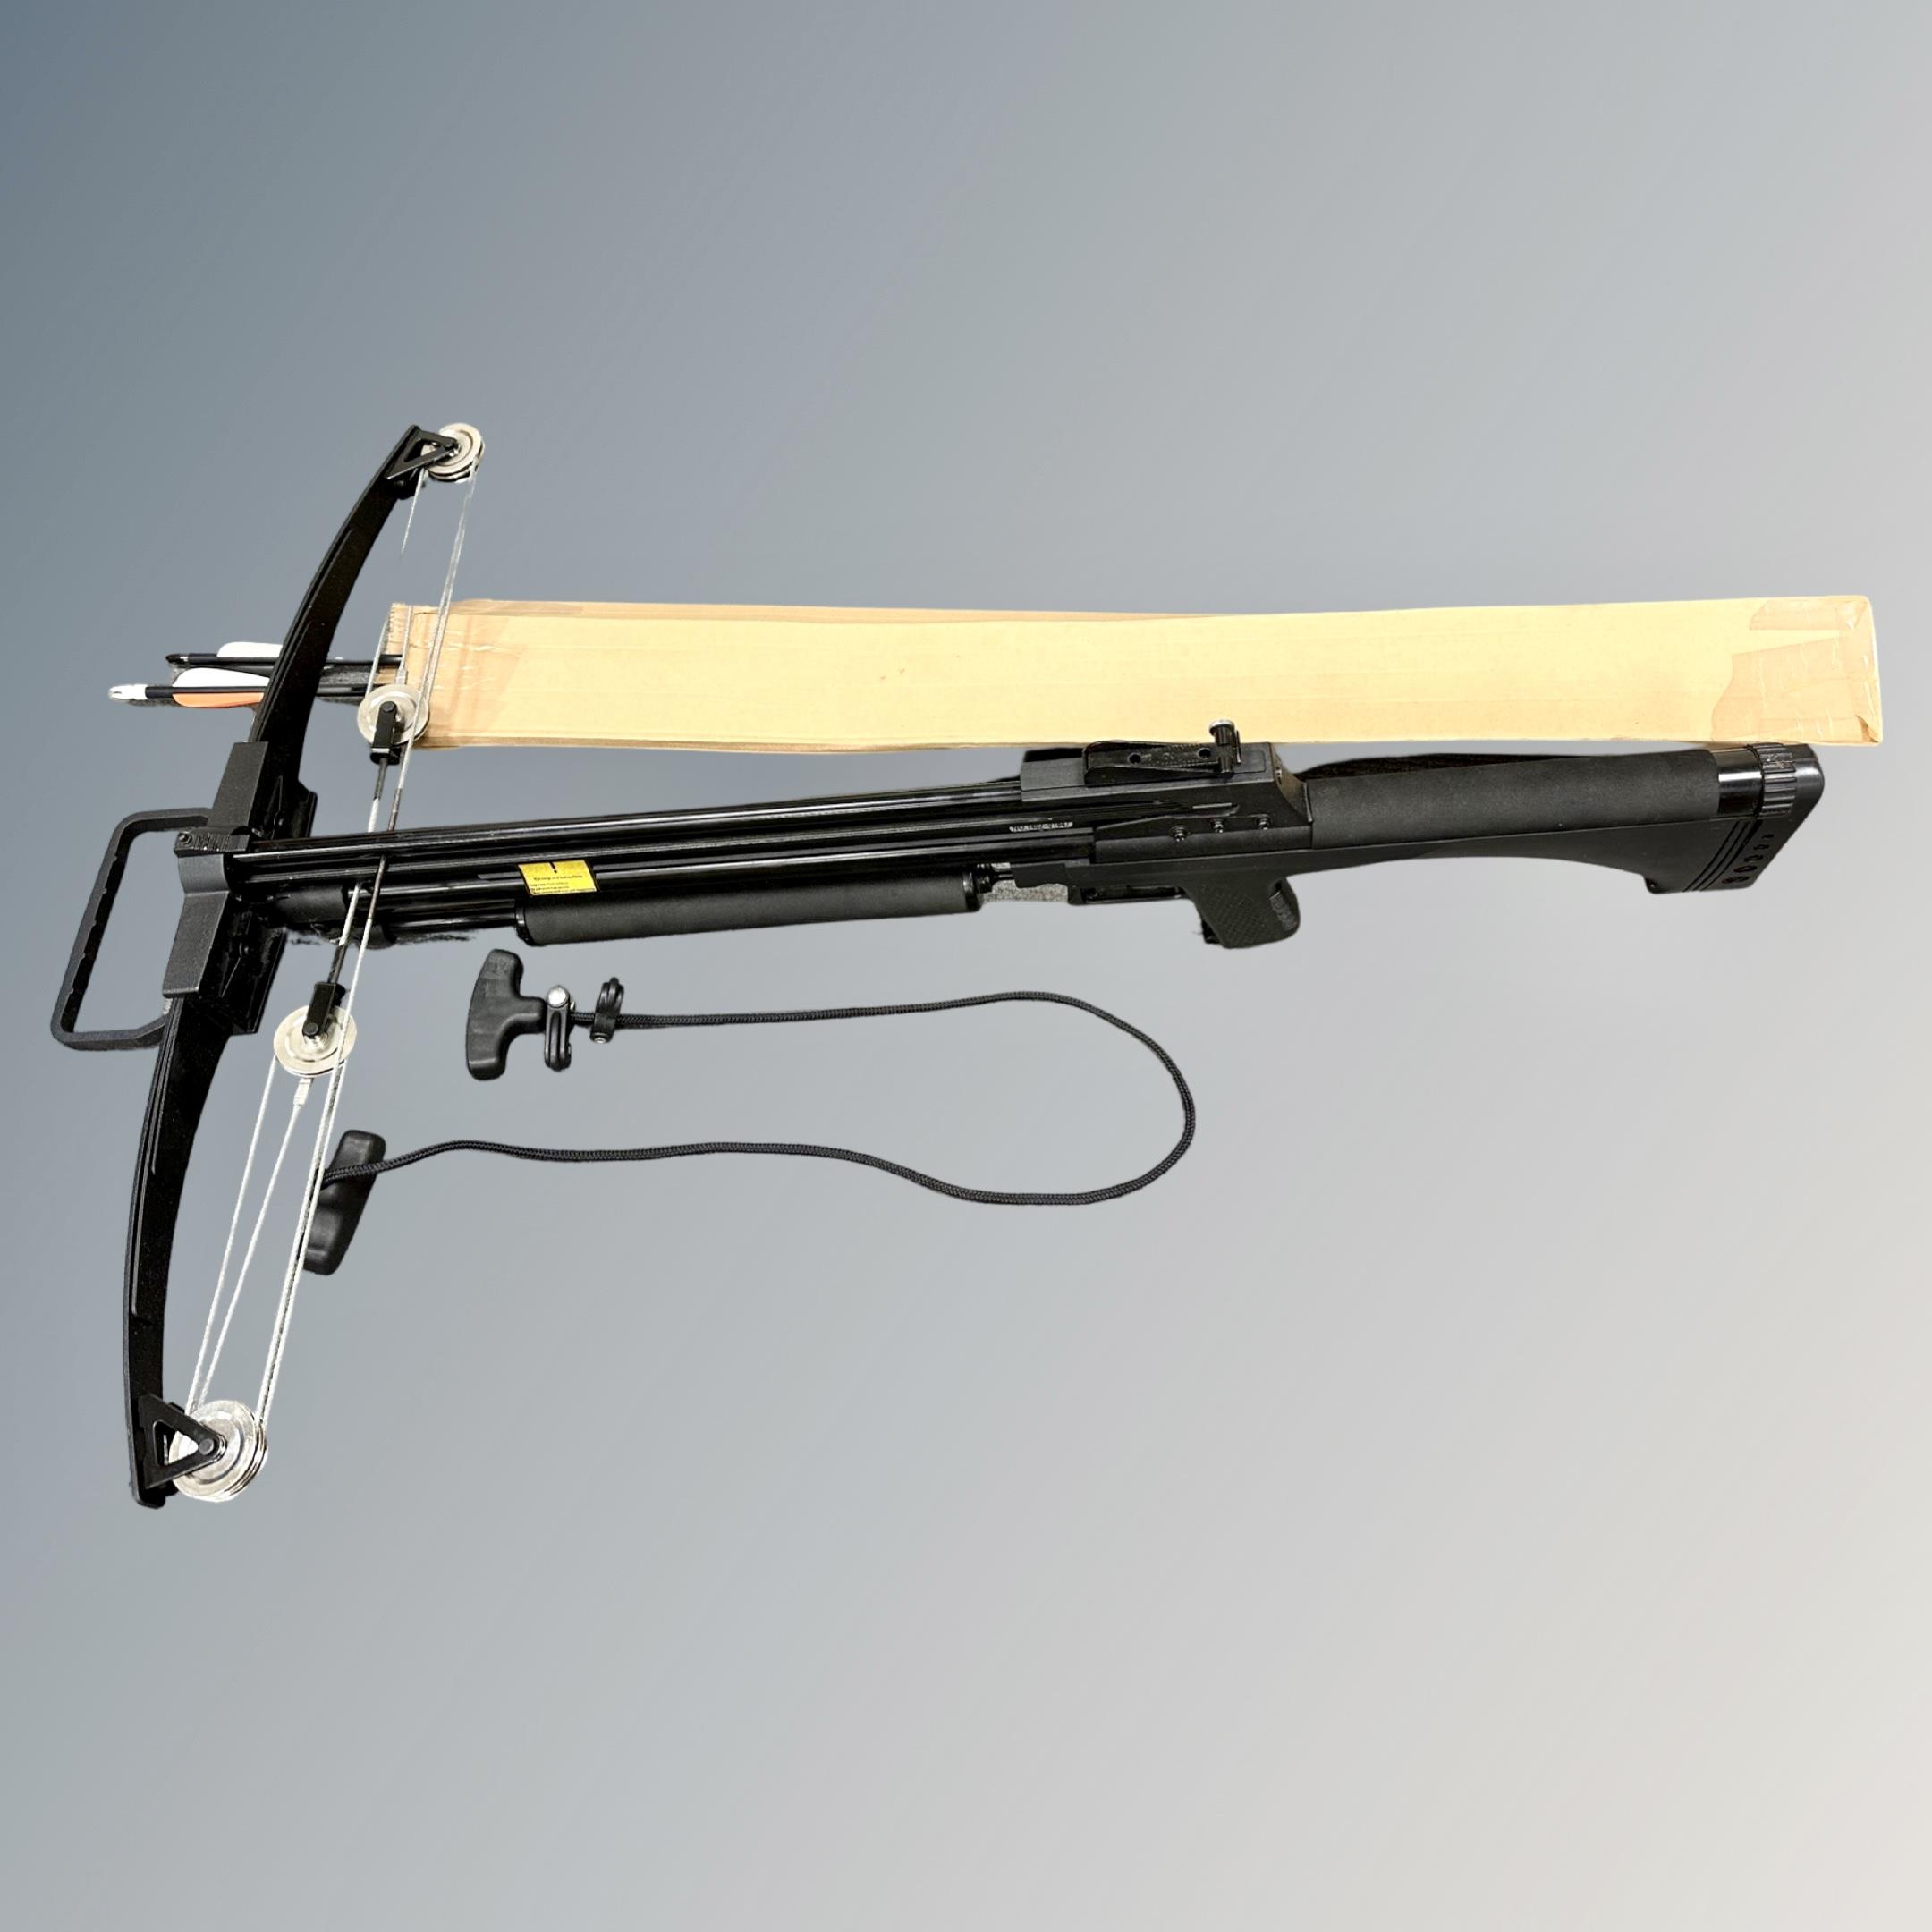 A crossbow with several bolts and drawing pull cord.